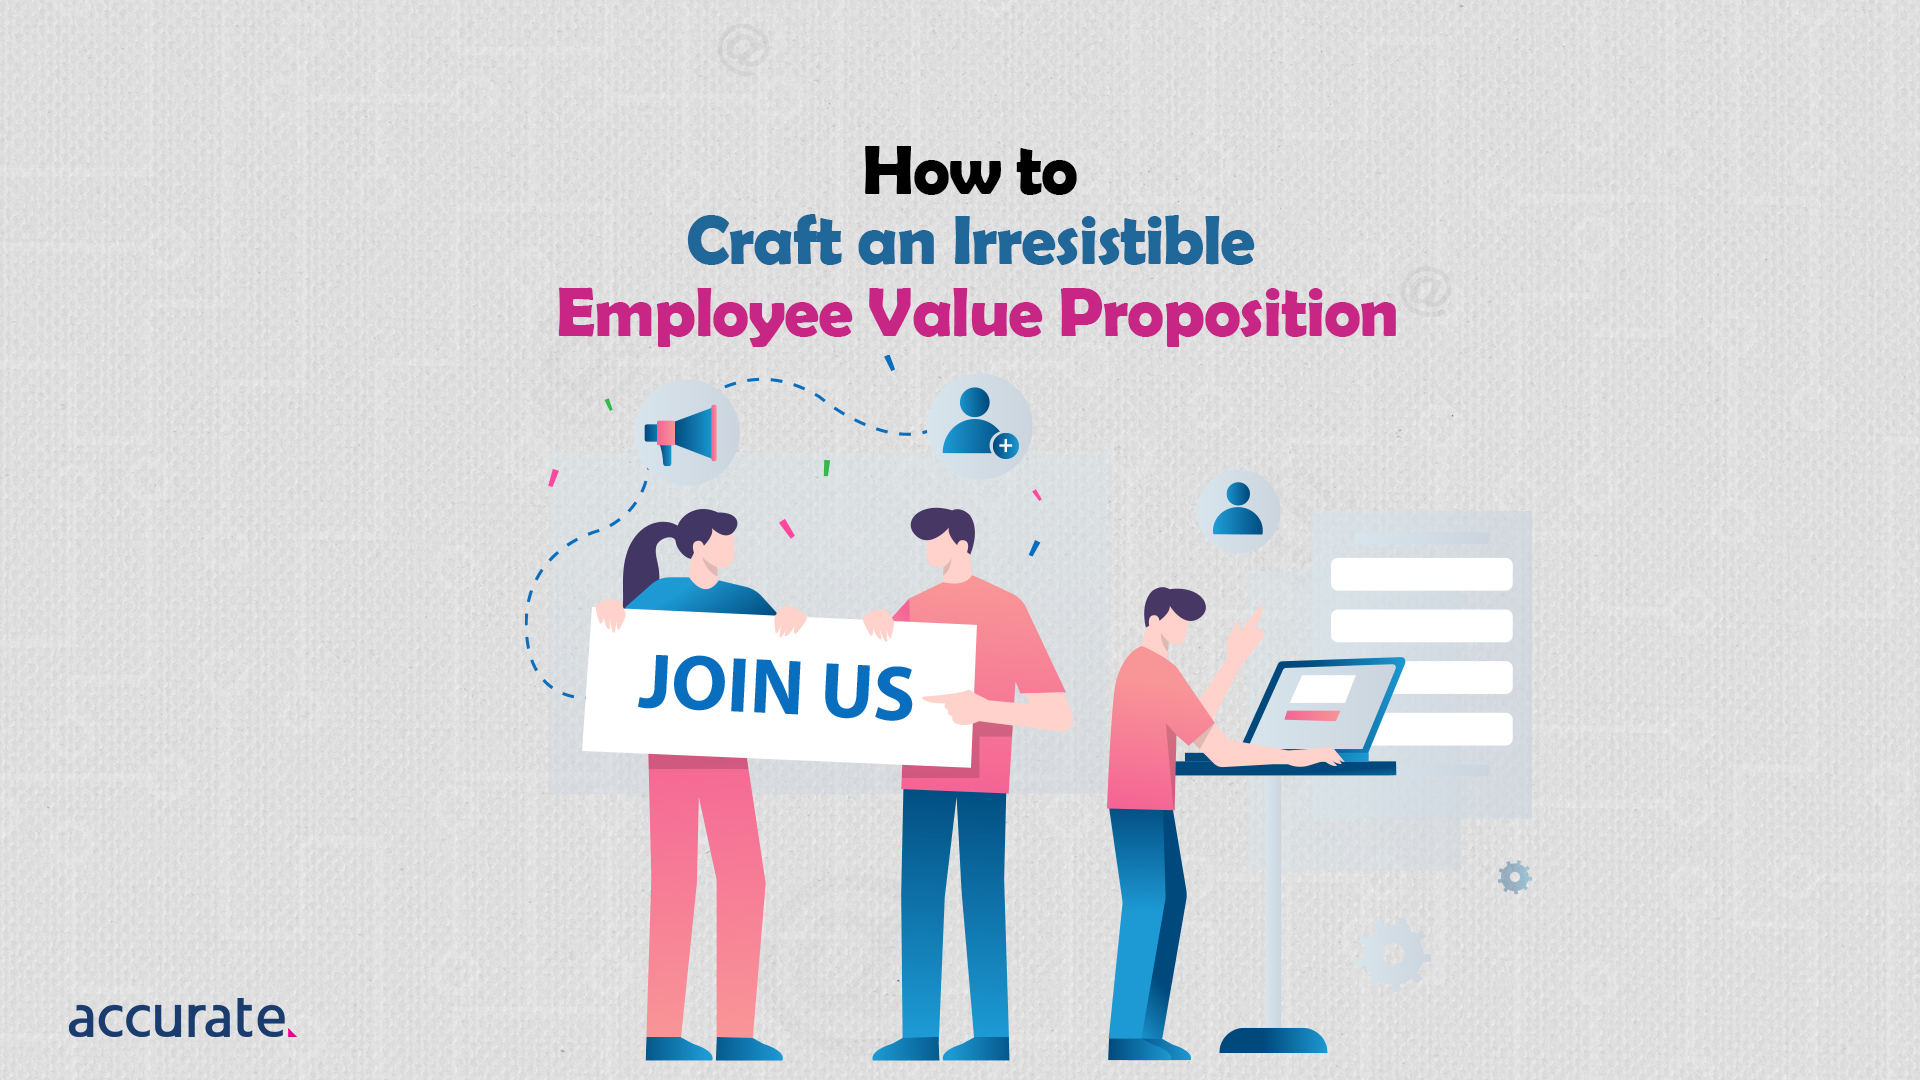 Featured Image - How to Craft an Irresistible Employee Value Proposition (EVP)